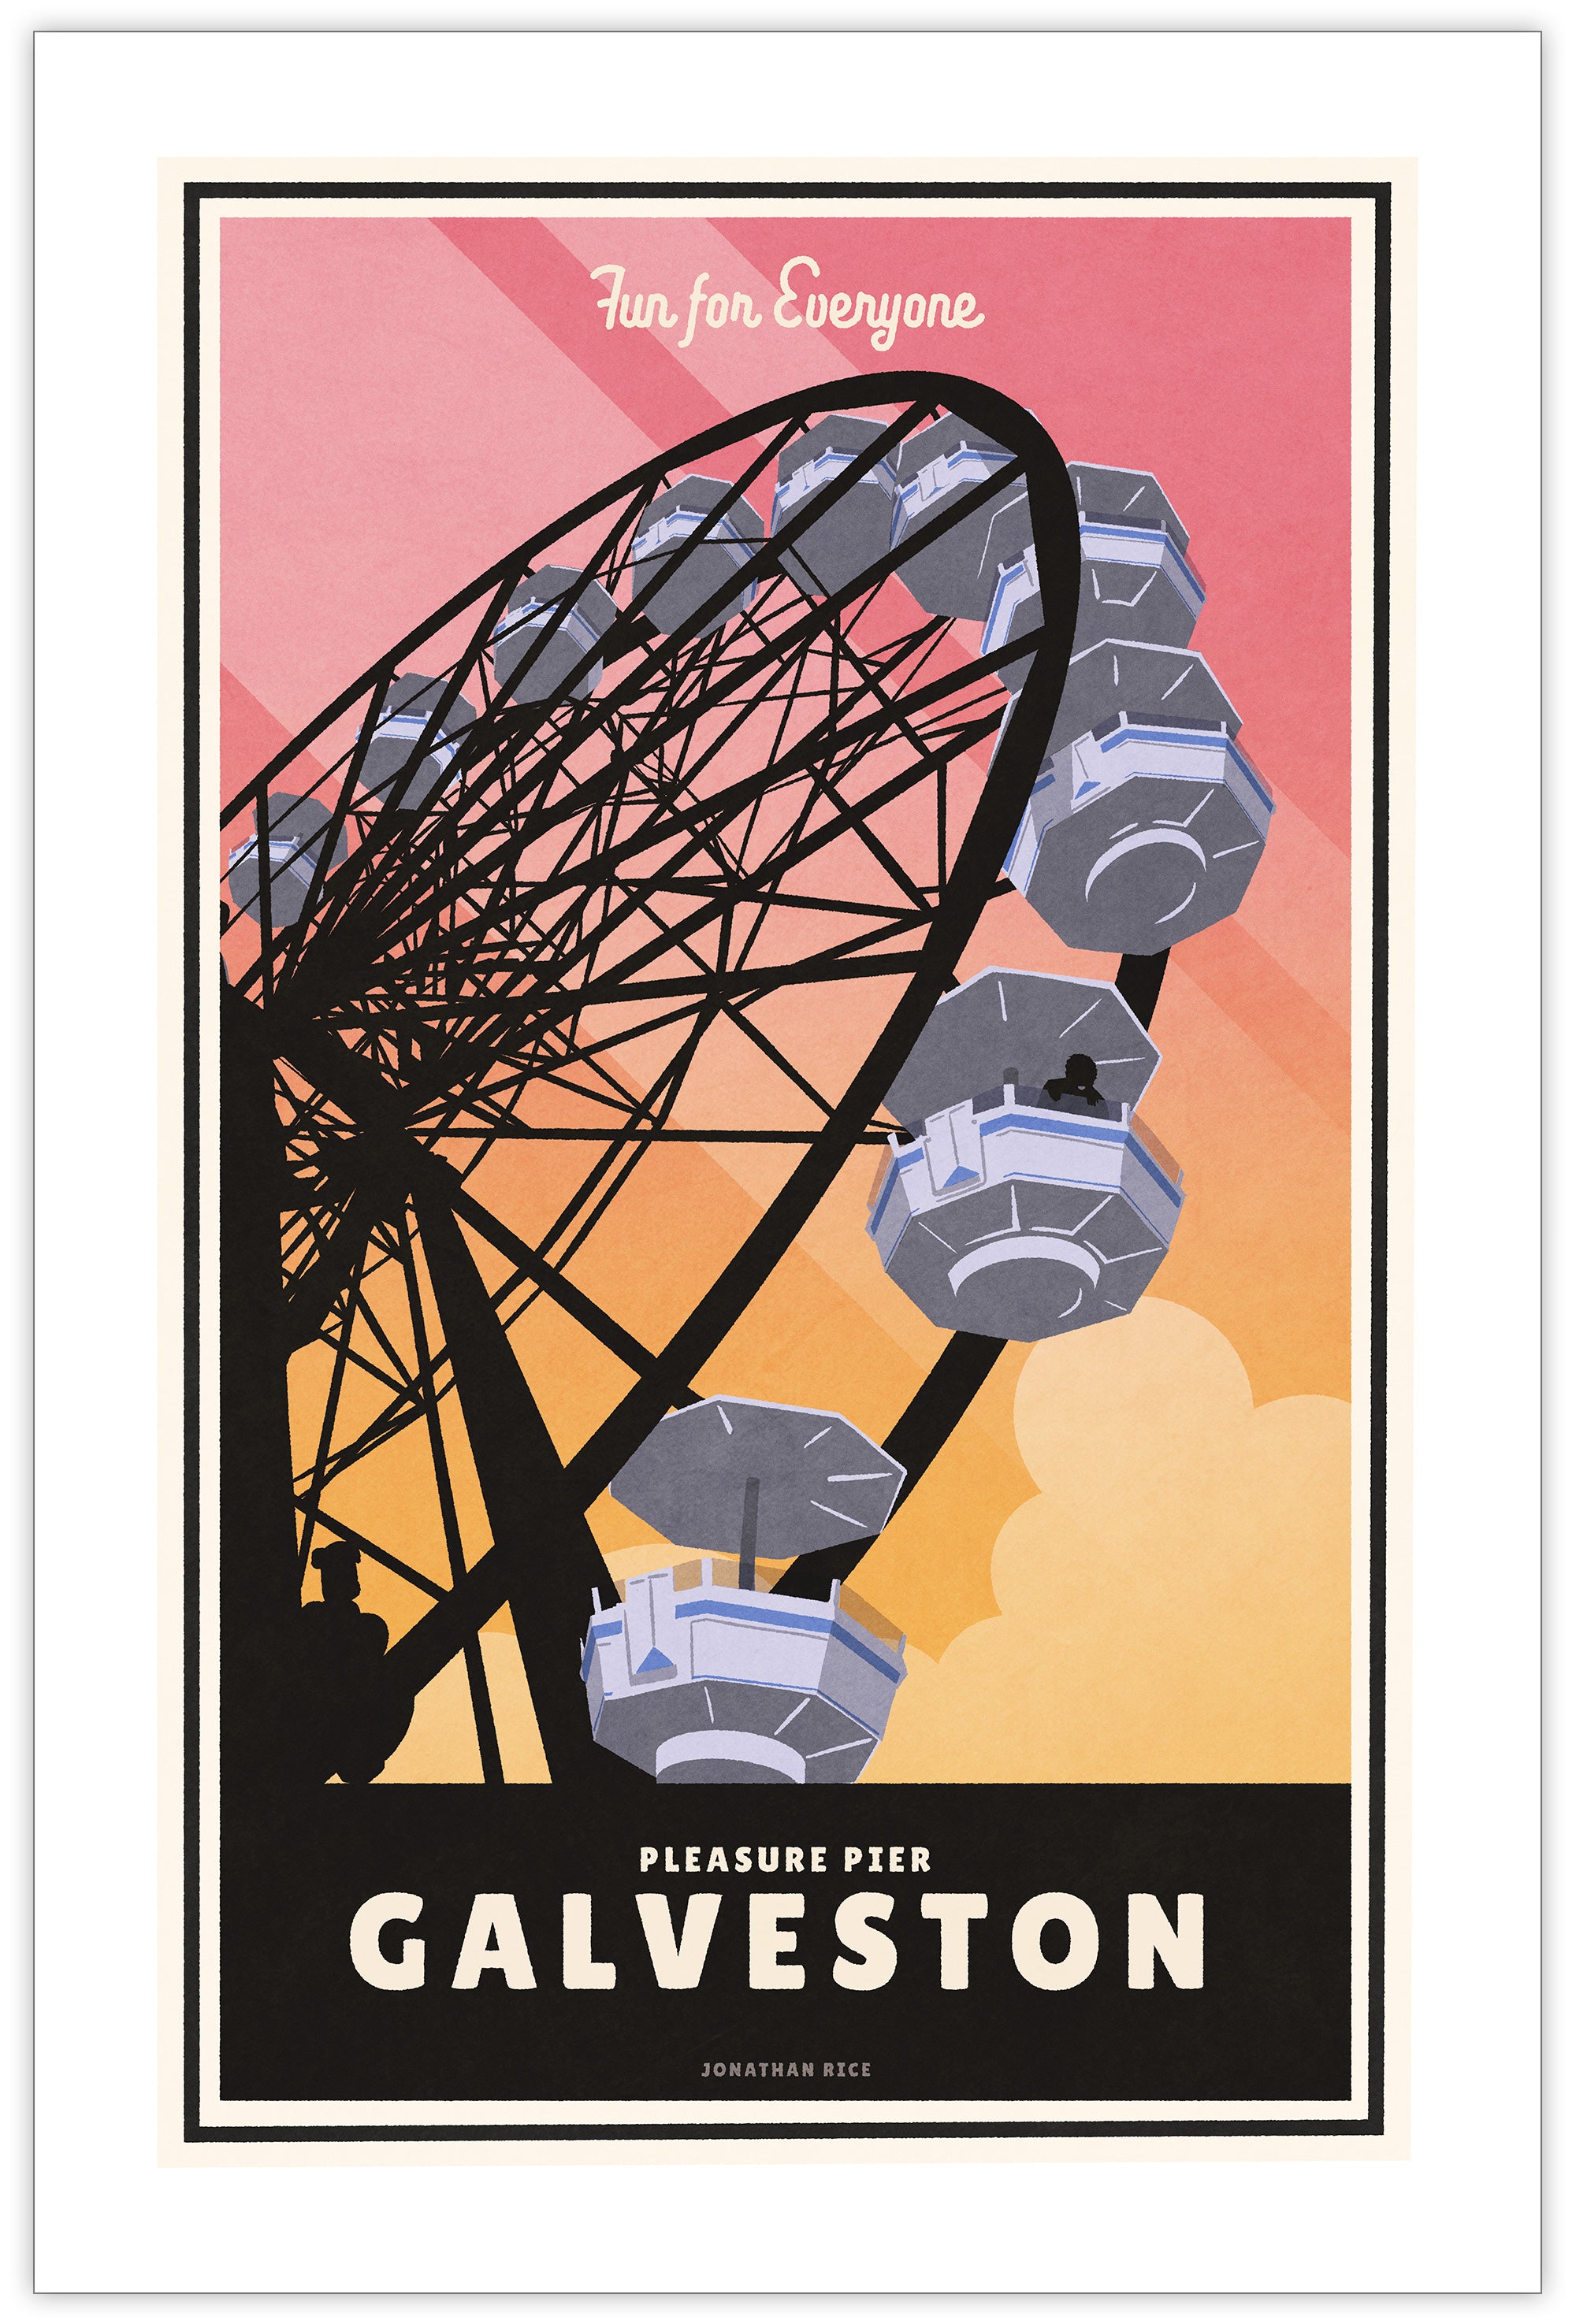 A retro style giclée art print of the Ferris Wheel on the Pleasure Pier in Galveston, Texas. It has the words “Fun for Everyone” at the top. The print primarily is in bold black with bright sunset colors. There are additional words a the bottom that says “Pleasure Pier, Galveston”.